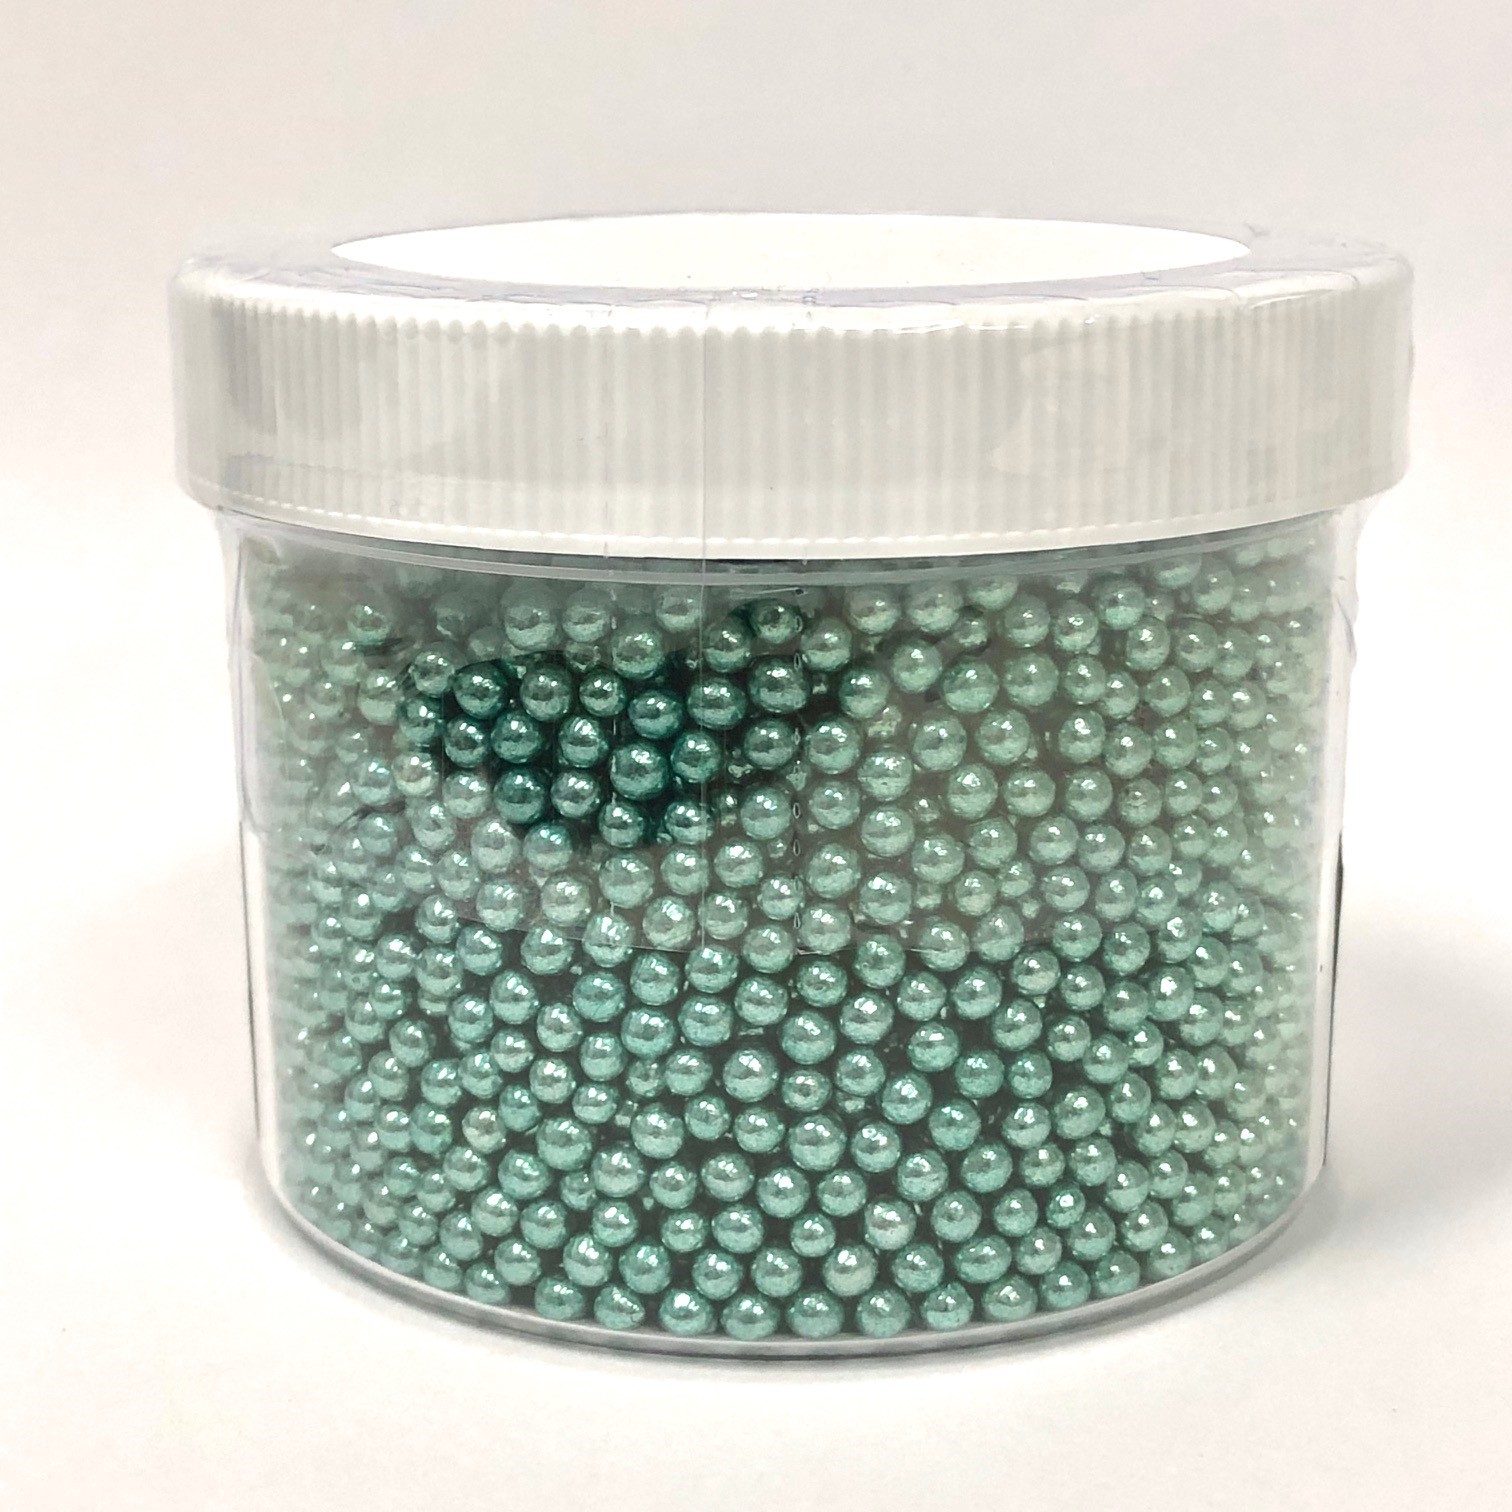 Dragee Metallic Green 4mm - 250g by Confectioners Chocie